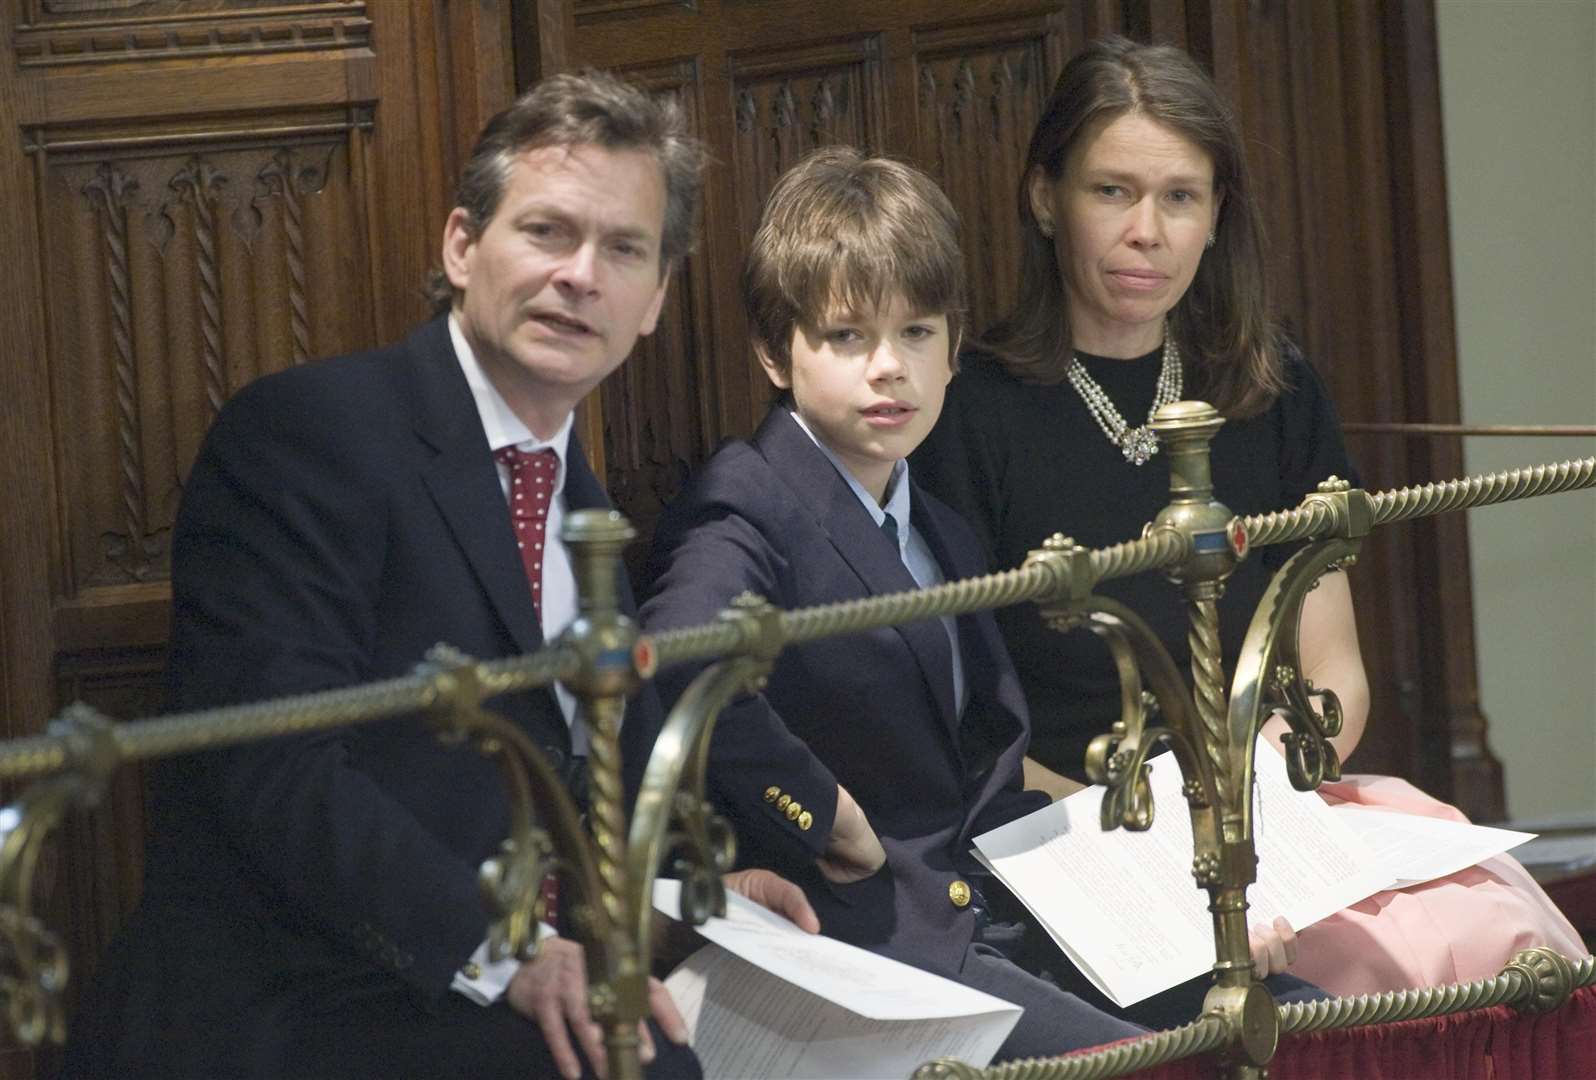 Daniel and Lady Sarah Chatto with their son Samuel in 2010 (Arthur Edwards/The Sun/PA)